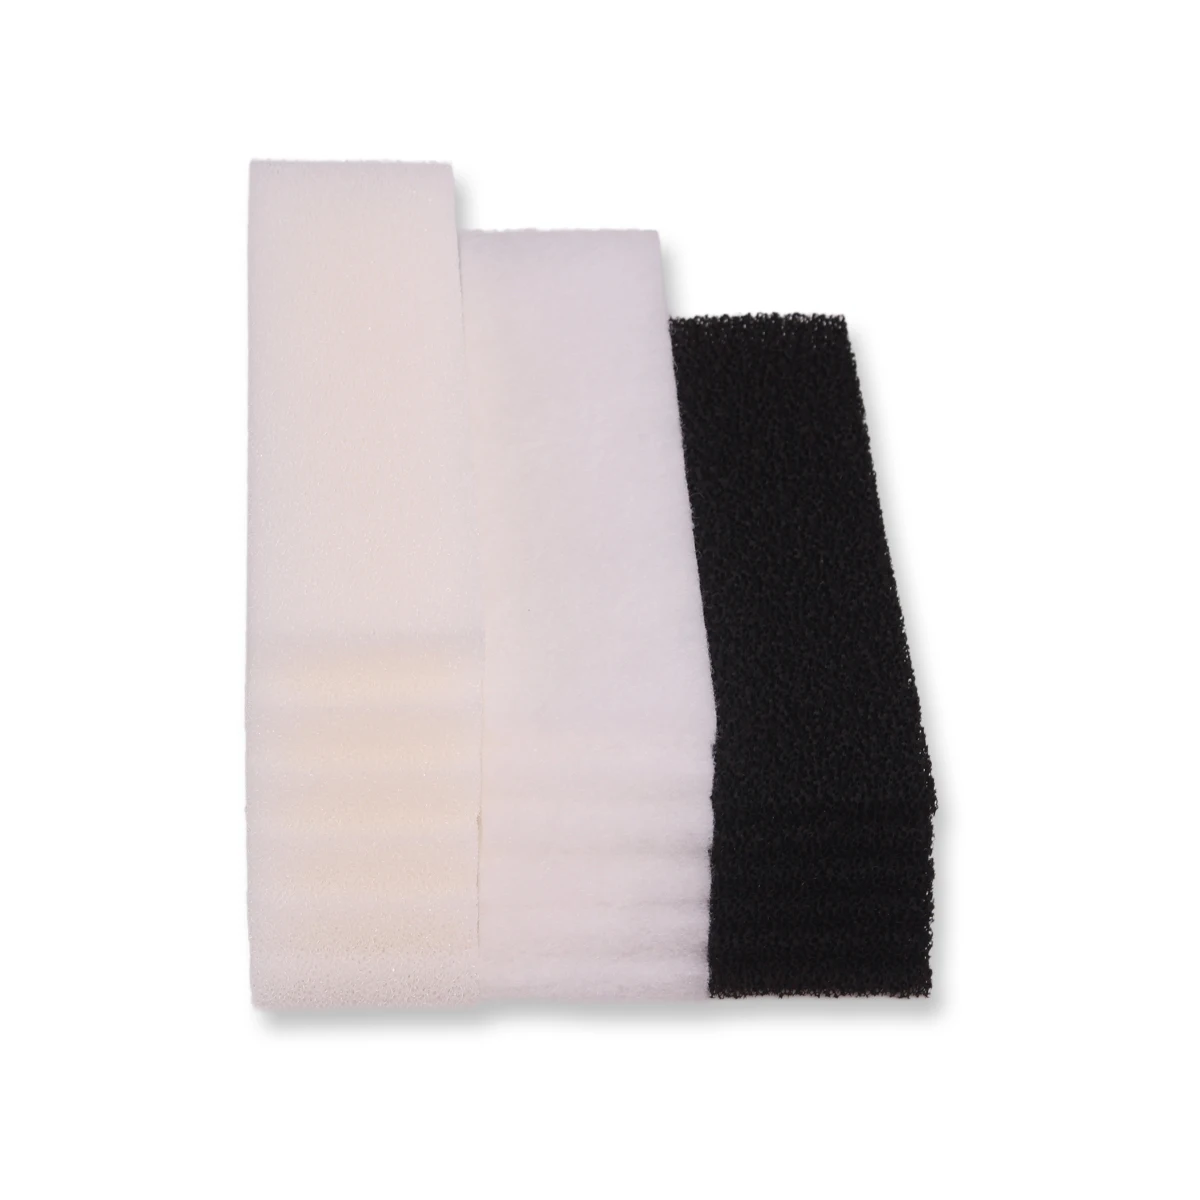 6x Foam Pads, 6x Carbon filter, 6x polyester filter pads INGVIEE Compatible Filter Pads for Fluval U4 Aquarium Filter